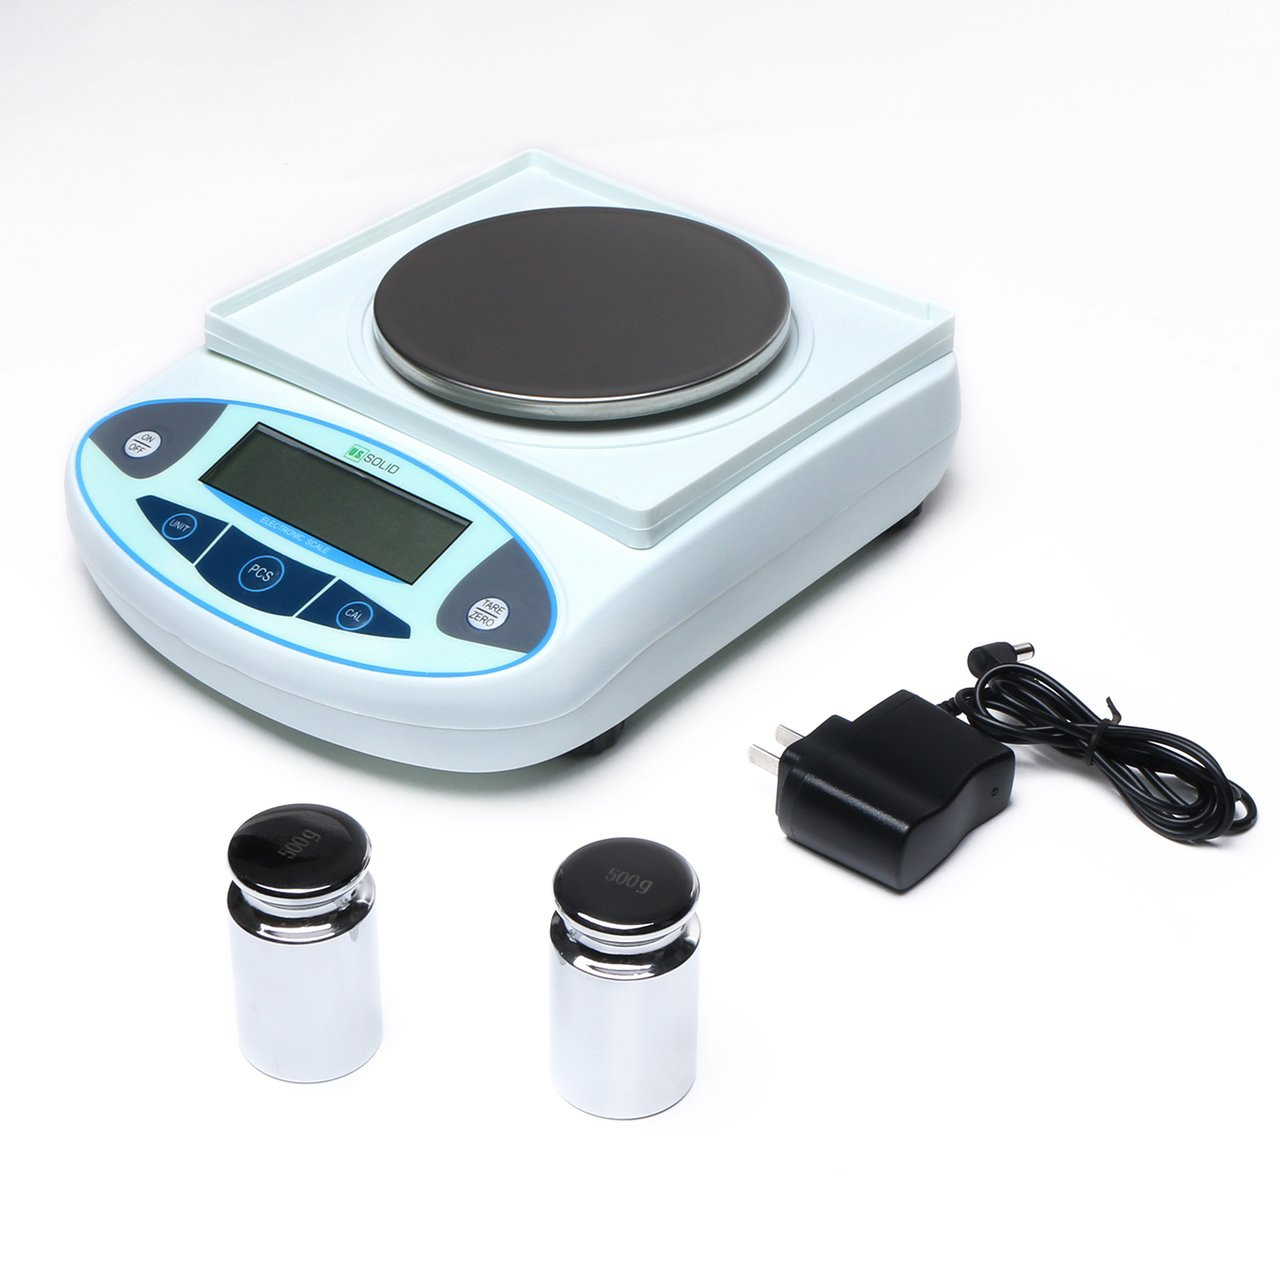 Digital Scale, 2000 G x 0.1 G, Home Science Tools